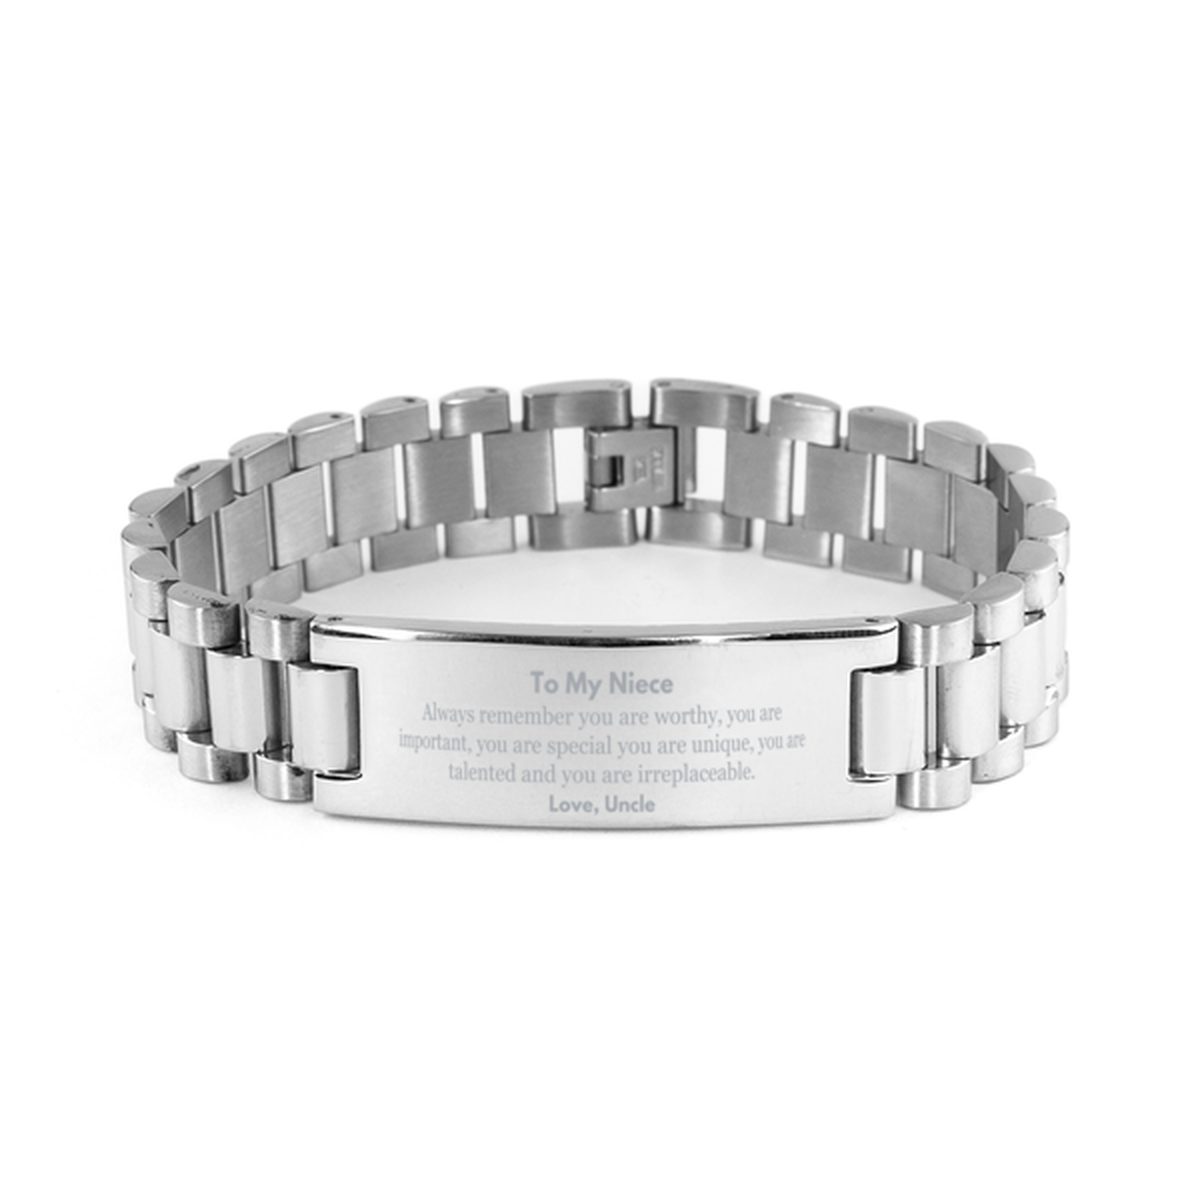 Niece Birthday Gifts from Uncle, Inspirational Ladder Stainless Steel Bracelet for Niece Christmas Graduation Gifts for Niece Always remember you are worthy, you are important. Love, Uncle